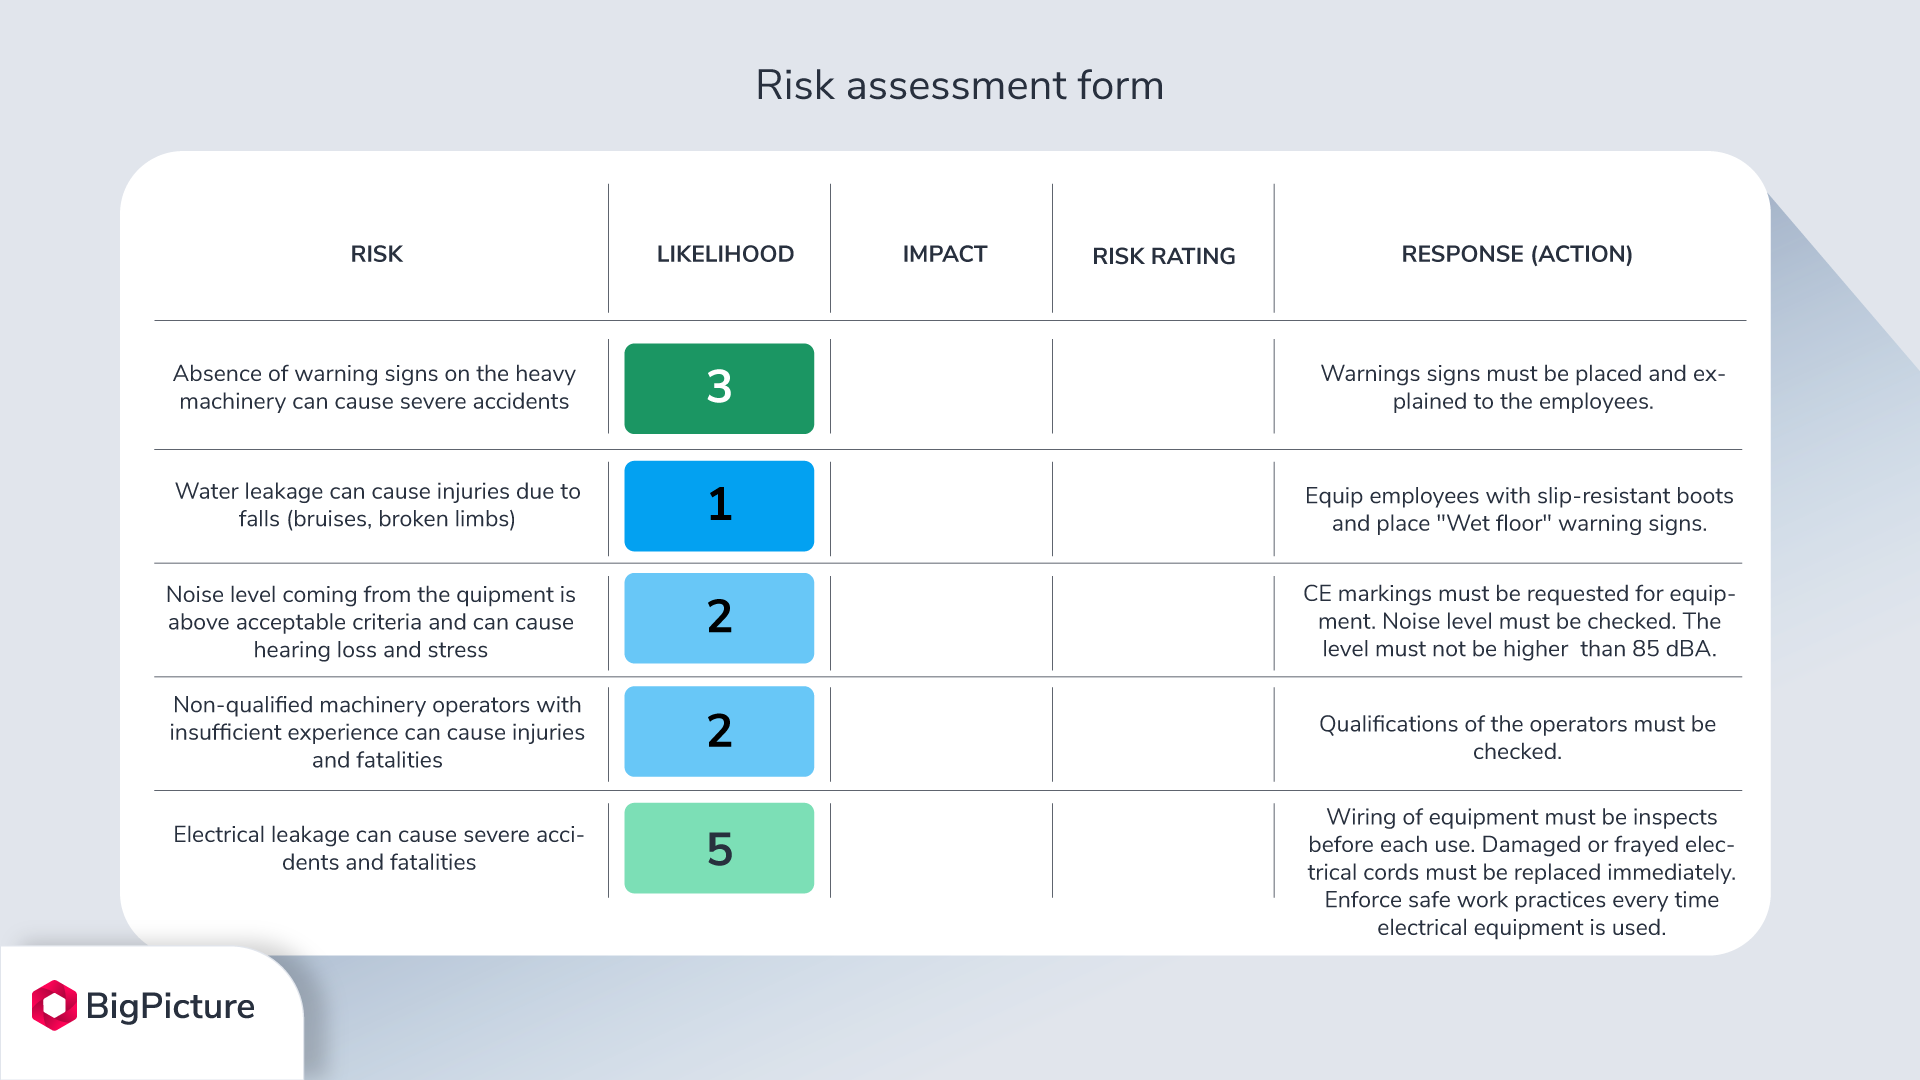 Risk assessment form in color - the likelihood column is filled with numbers.